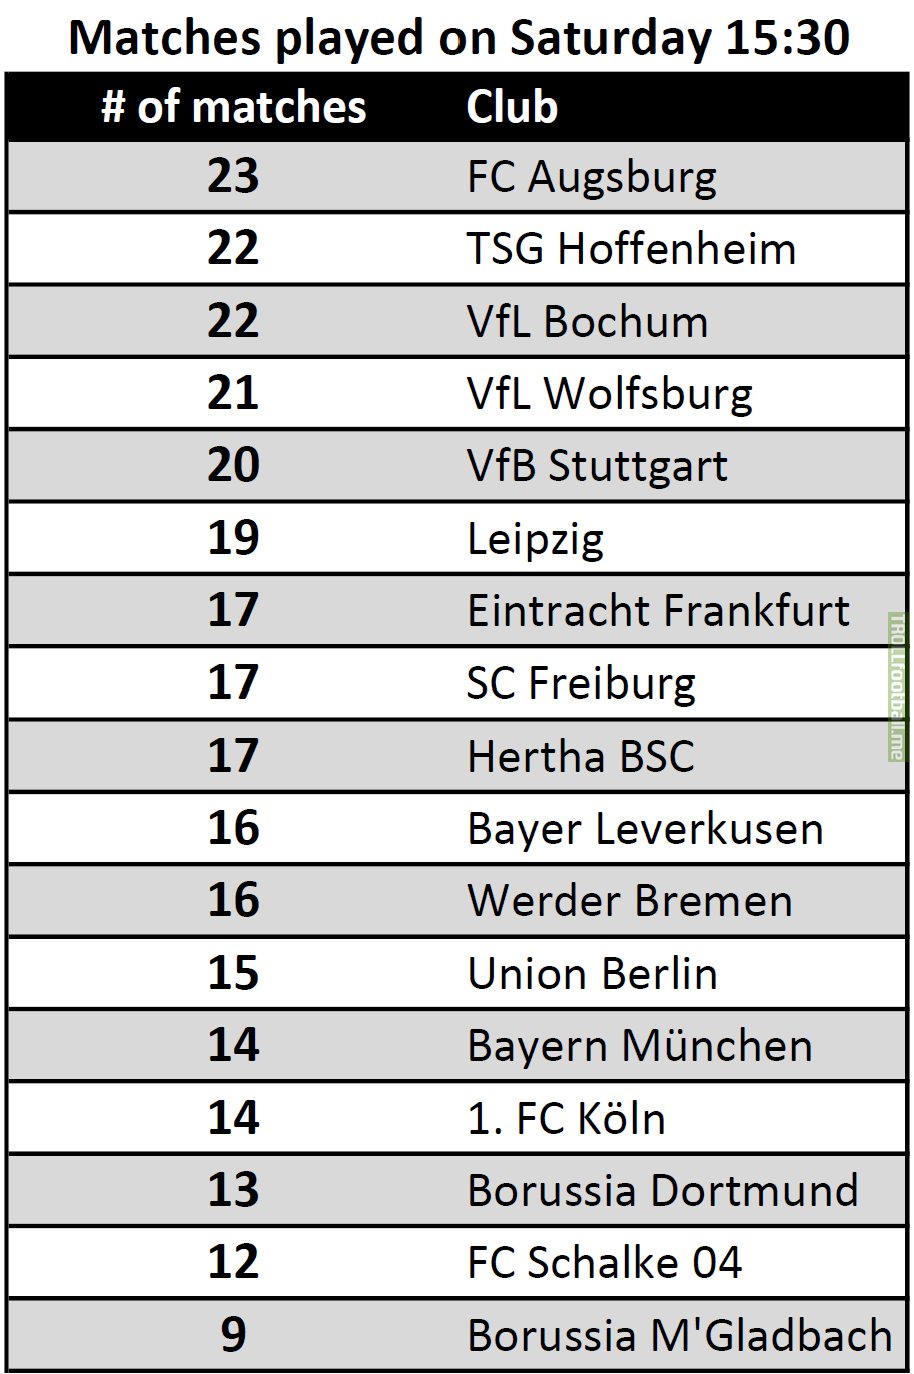 Amount of matches played by each Bundesliga club in the Saturday 15:30 conference this season